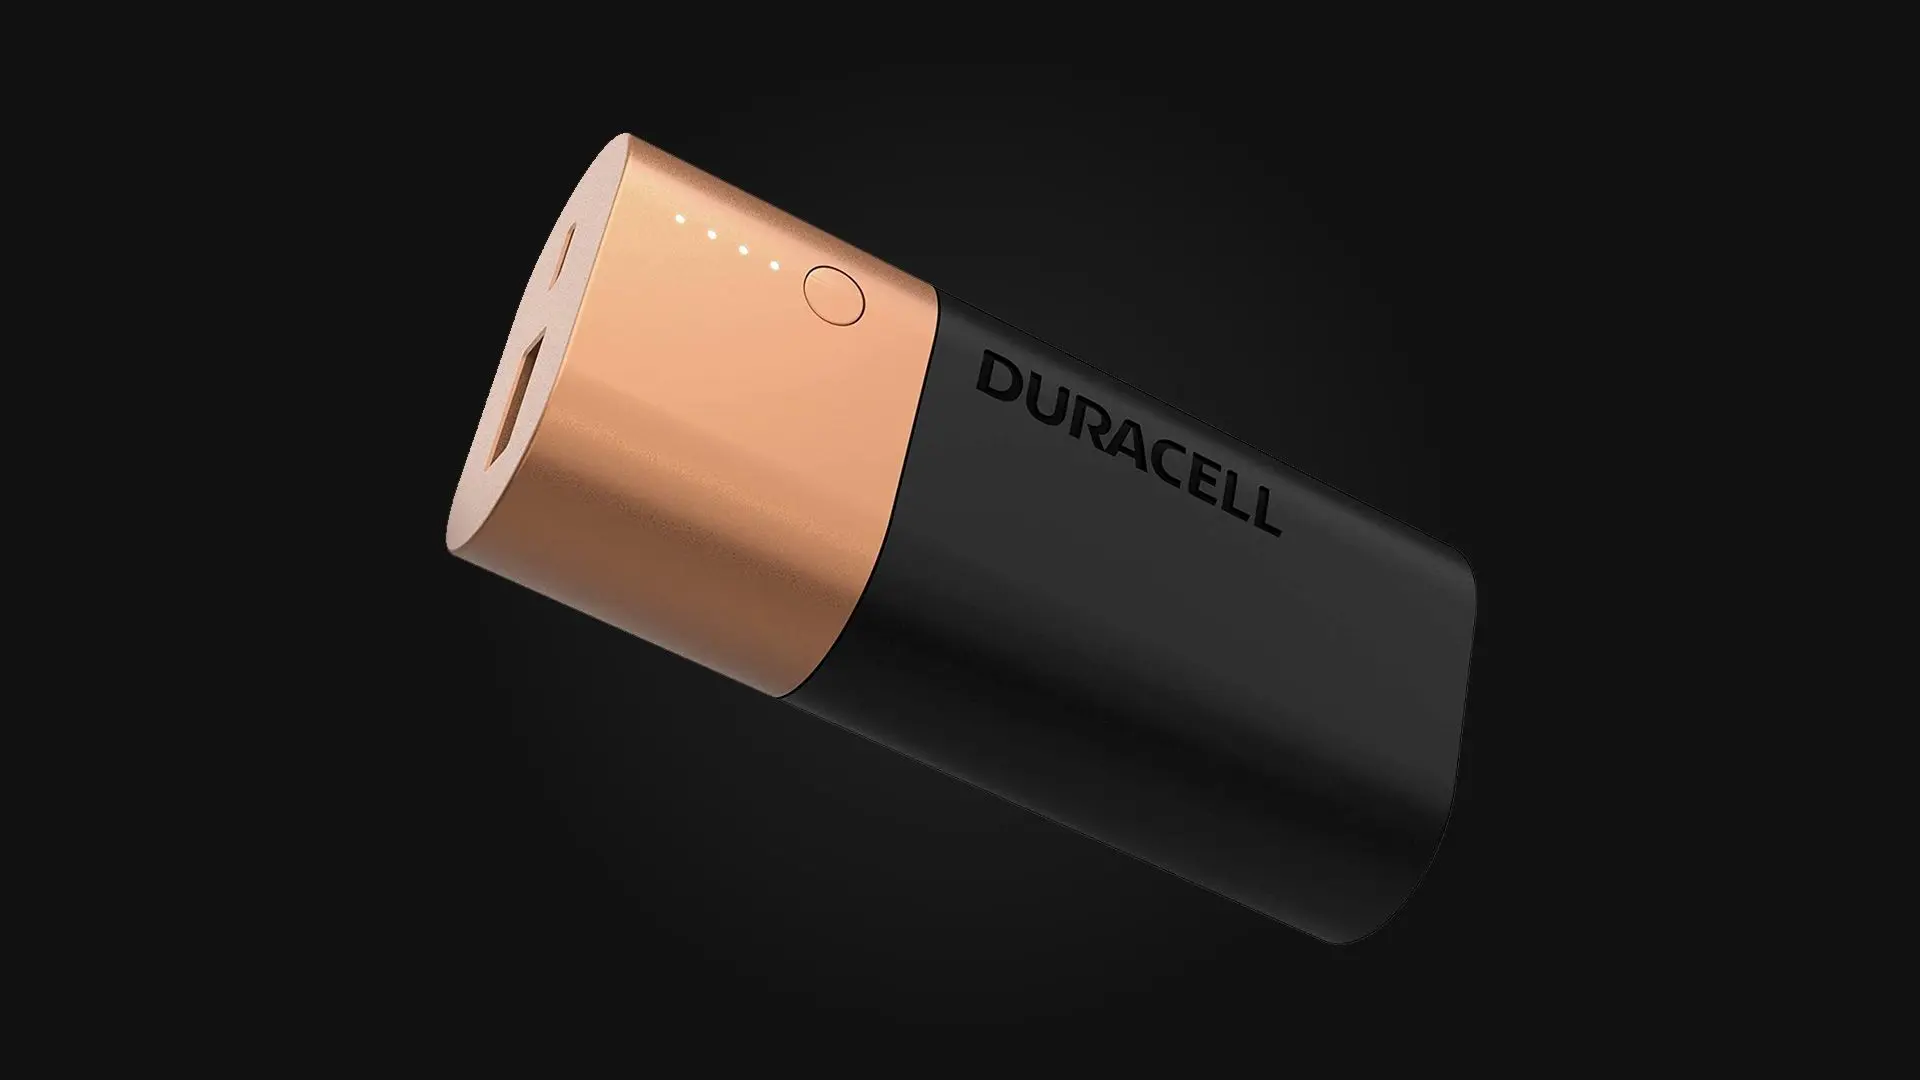 Duracell by Studio Volpi